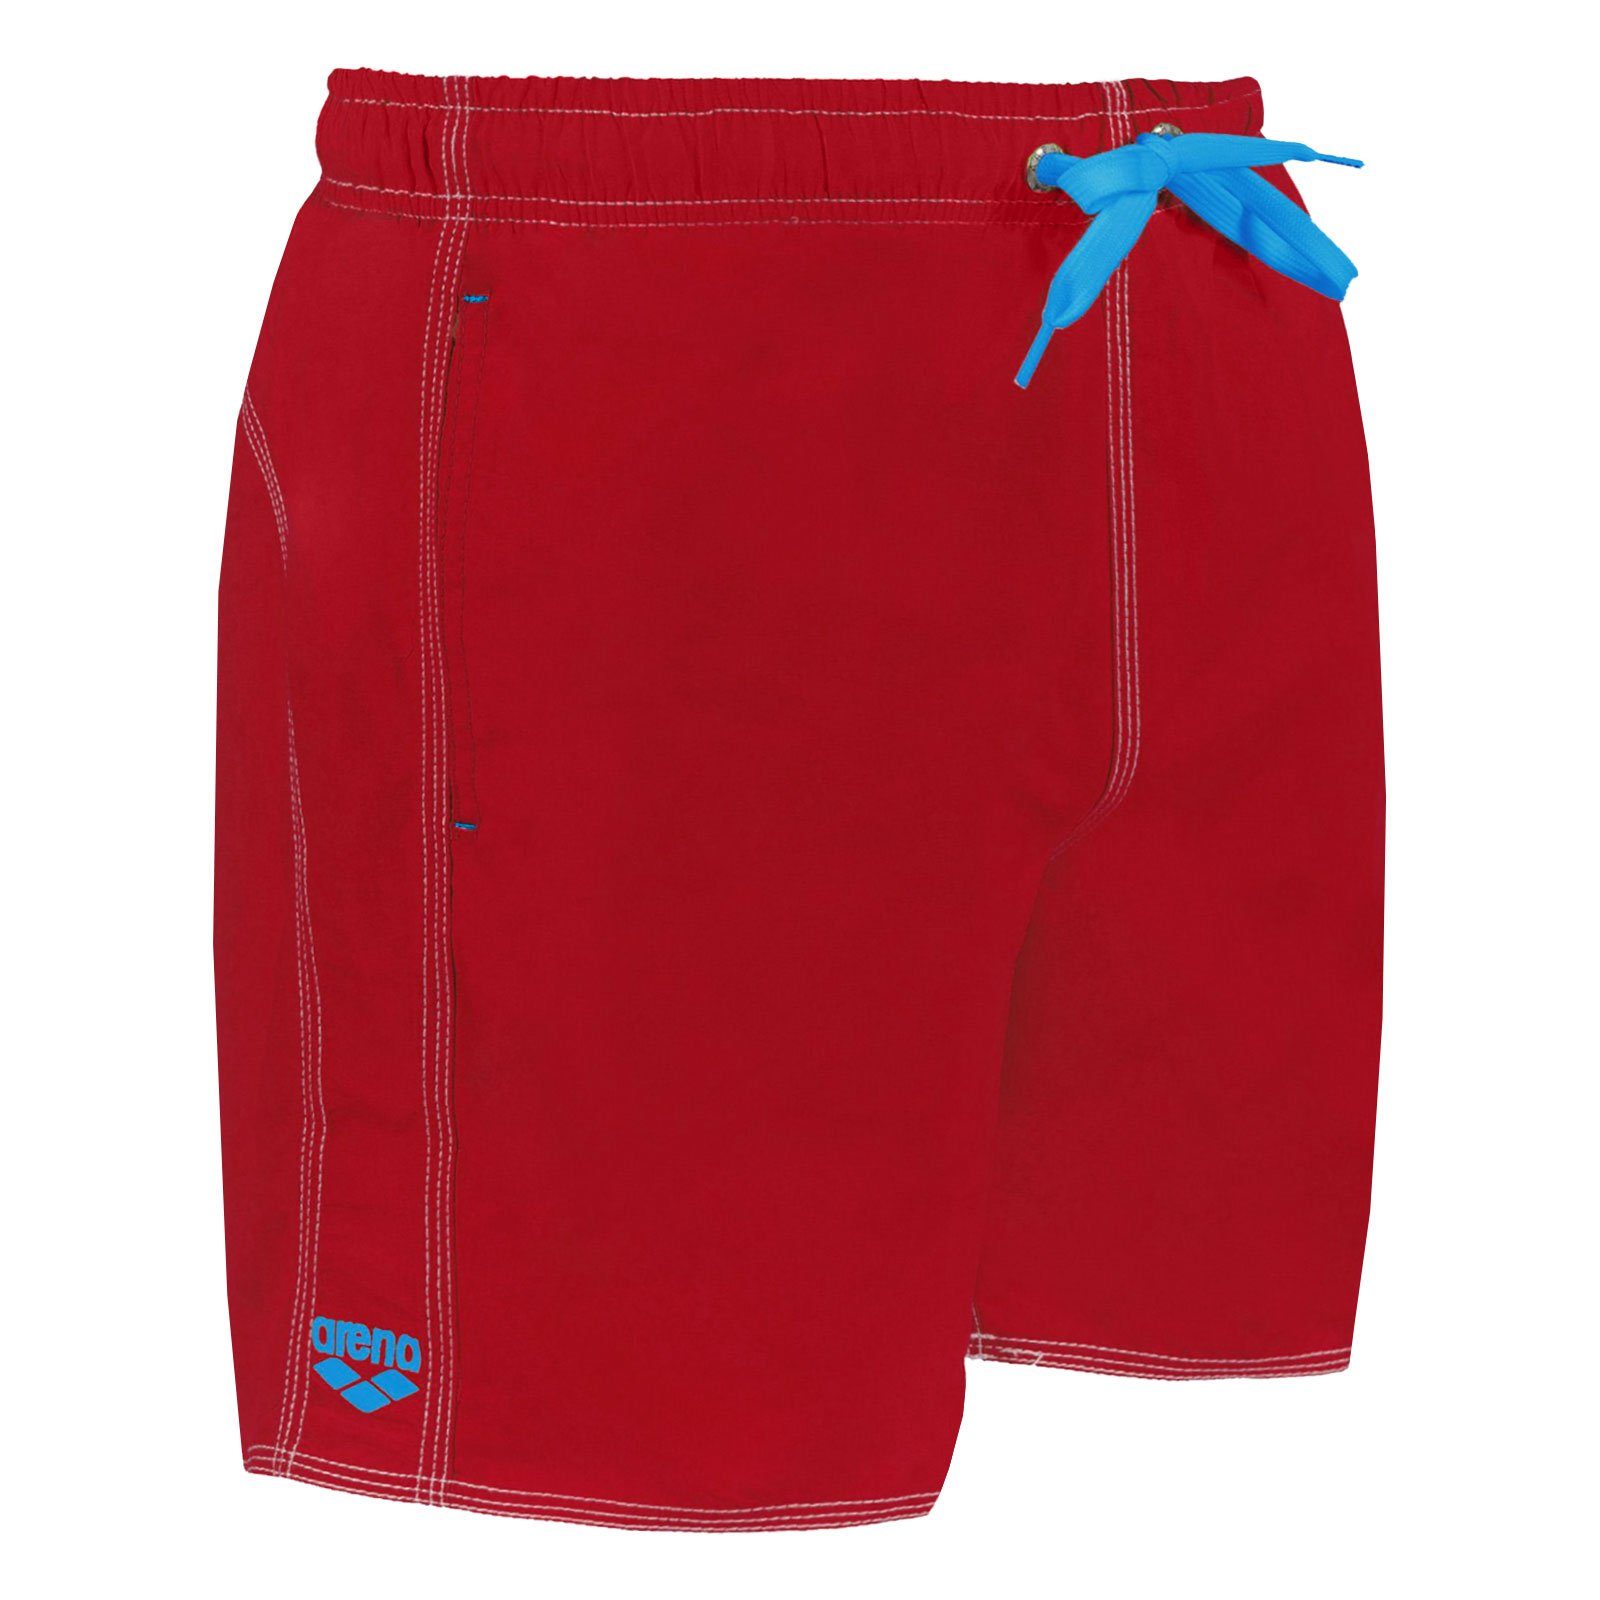 Arena Badehose Fundamentals Solid Boxer in starken Trendfarben 40515-48 red / turquoise